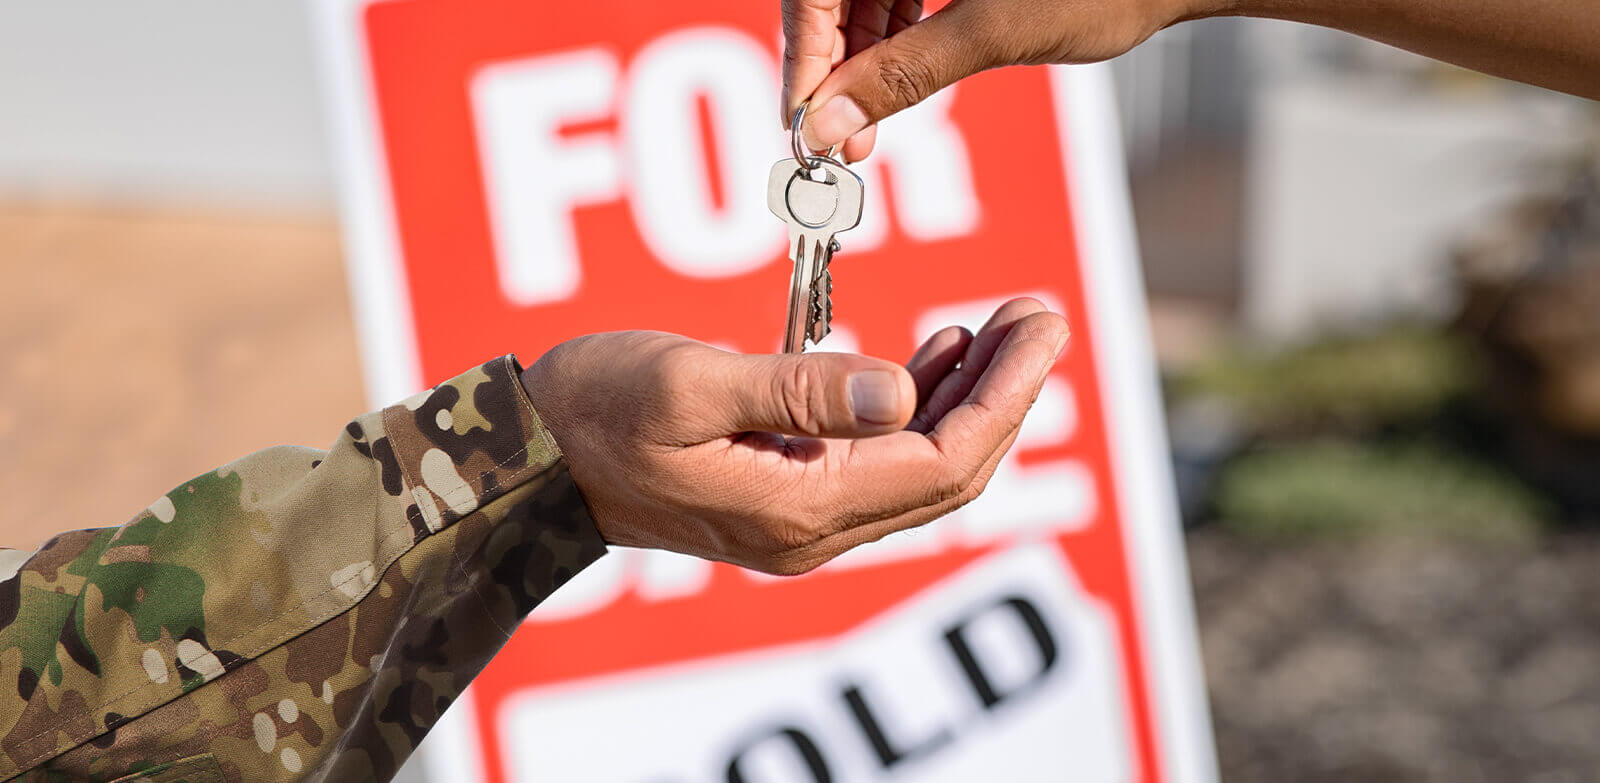 Image of a solider receiving house keys in front of a red "For Sale" sign